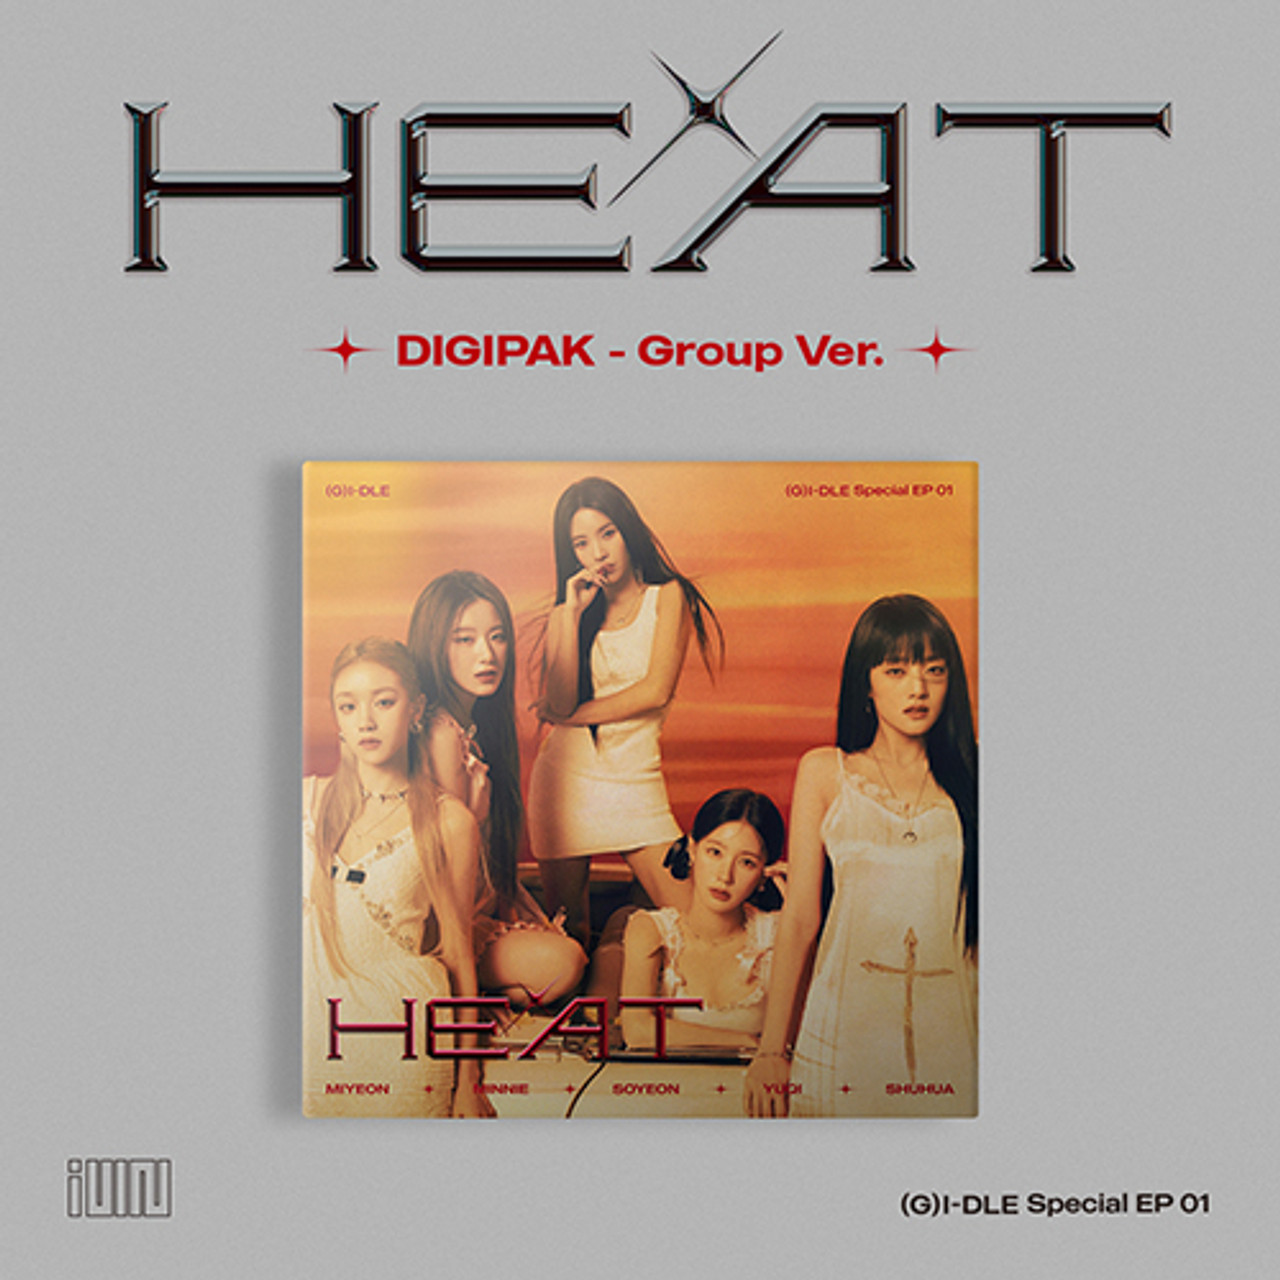 GIDLE  Special 1st EP HEAT DIGIPAK  Group Ver